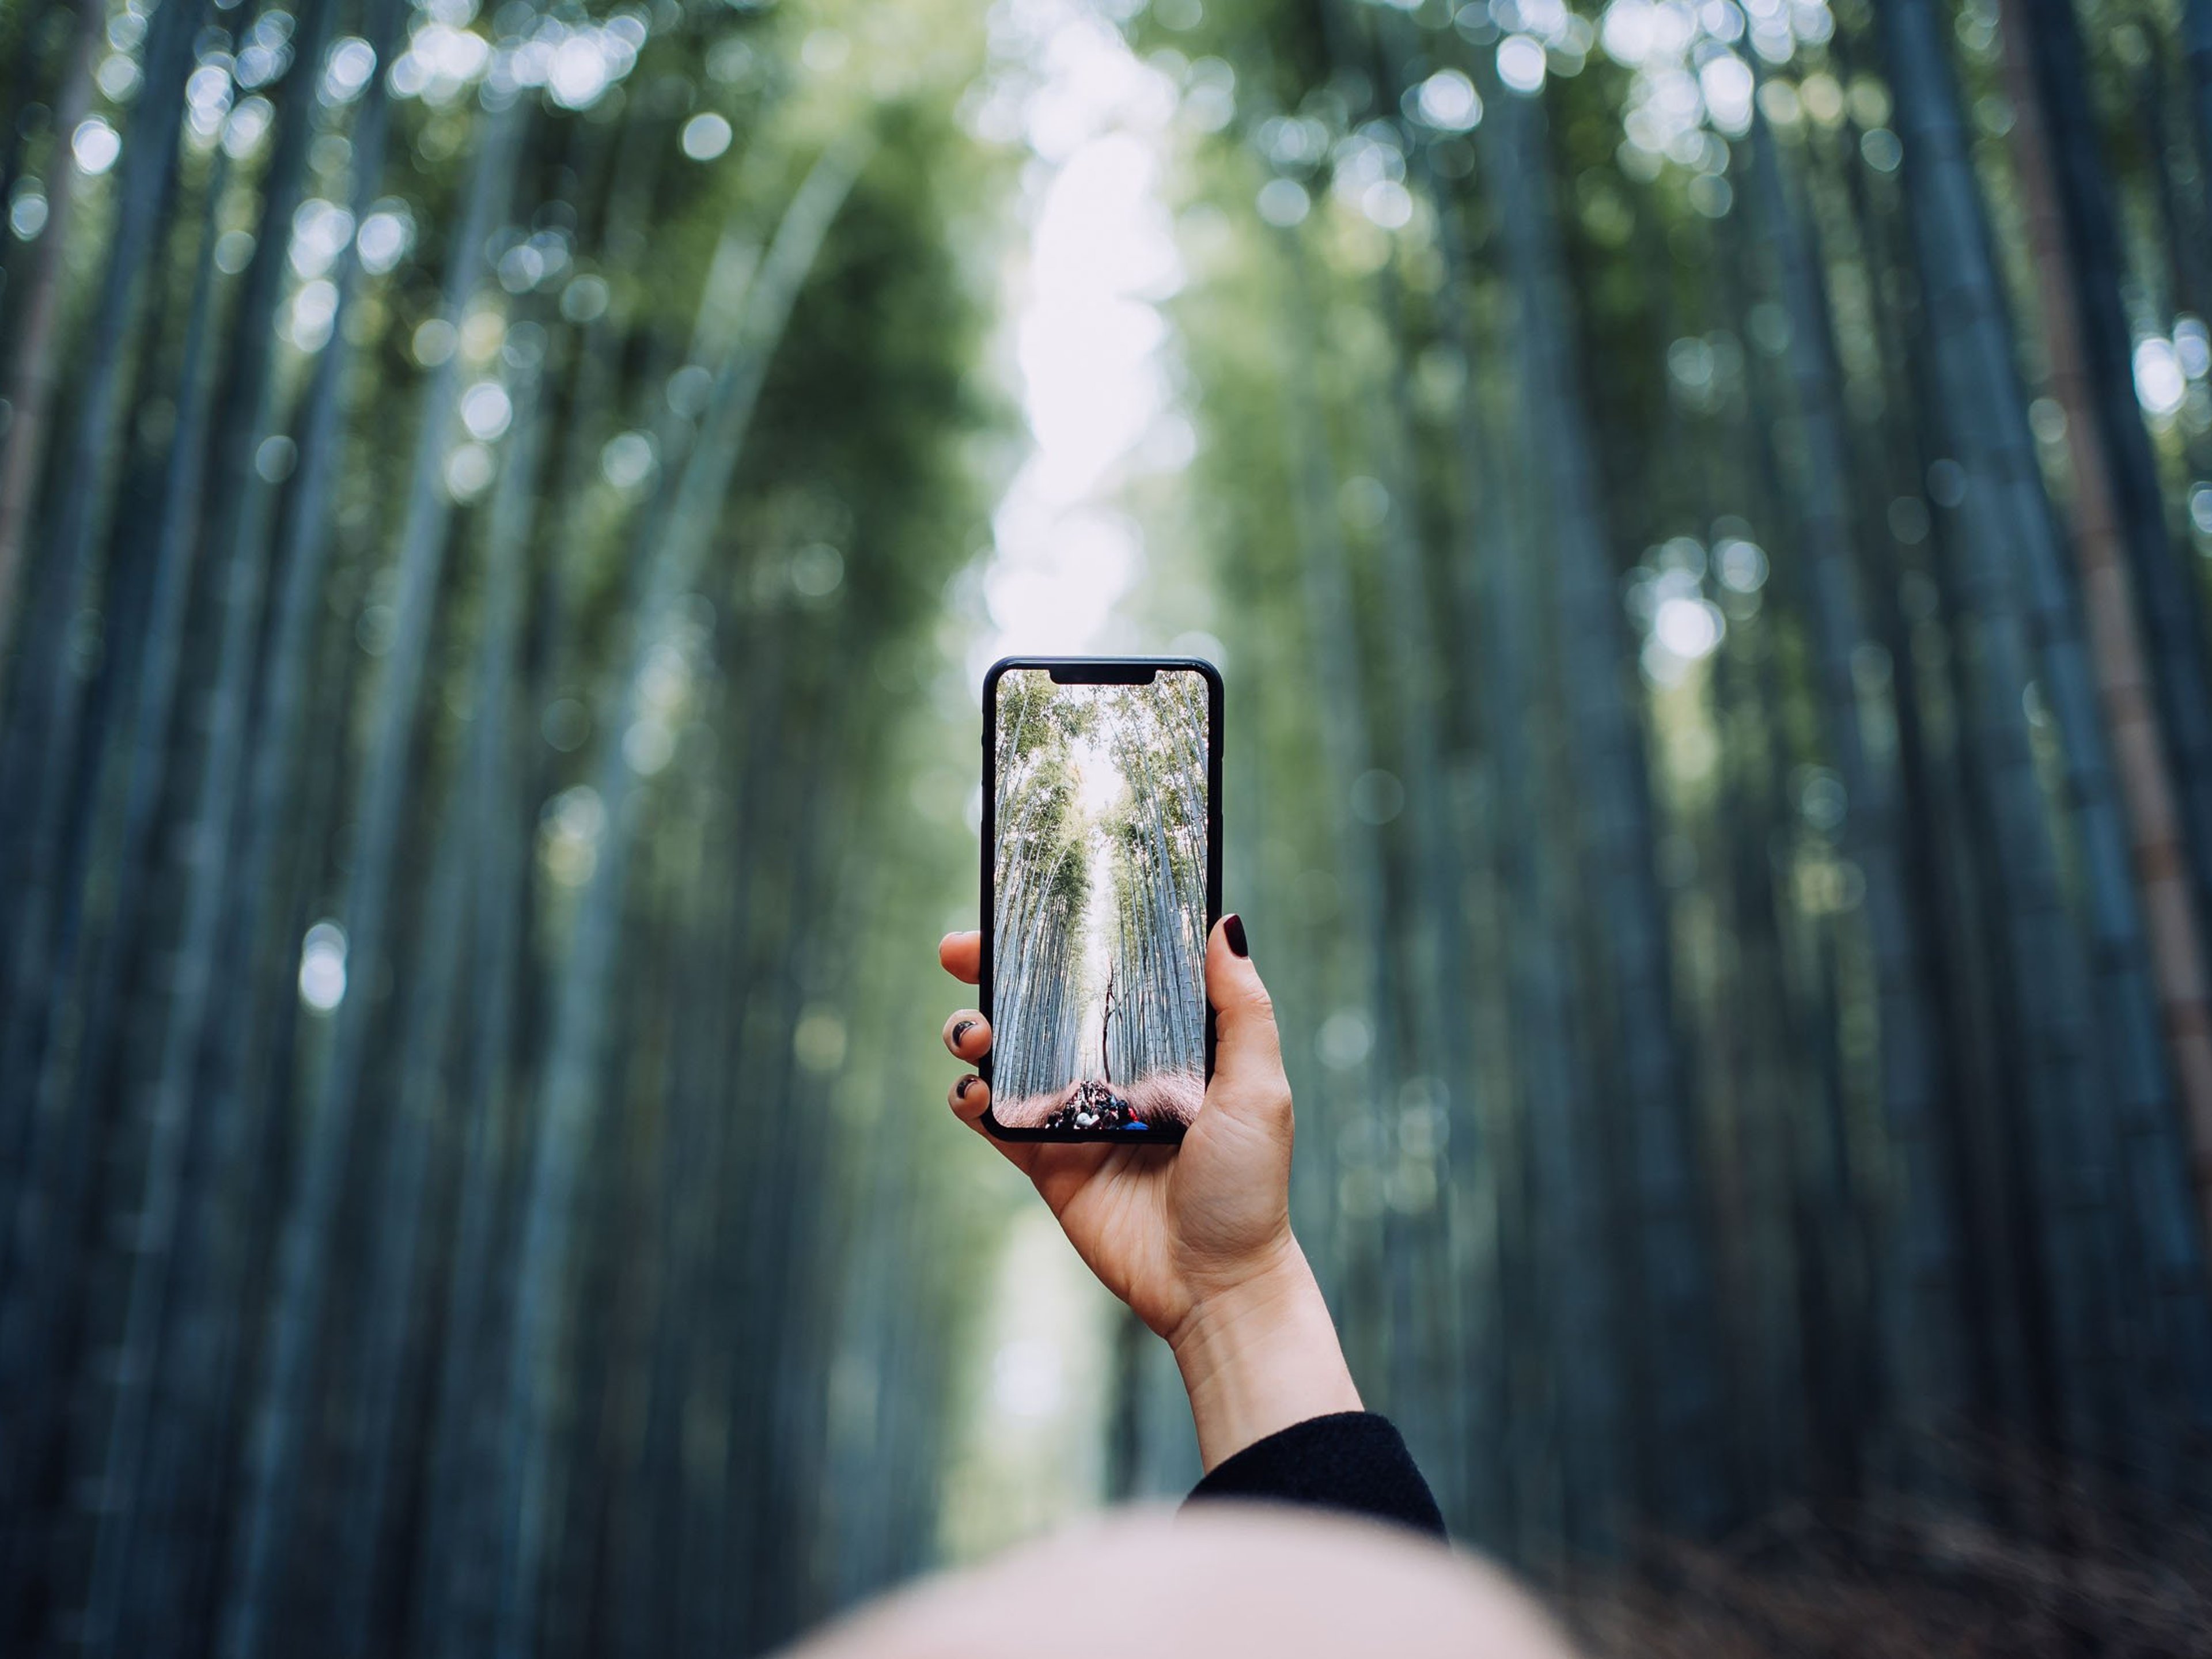 Asian female traveller photographing the spectacular nature scenics of Arashiyama Bamboo forest with smartphone while travelling in Kyoto, Japan.